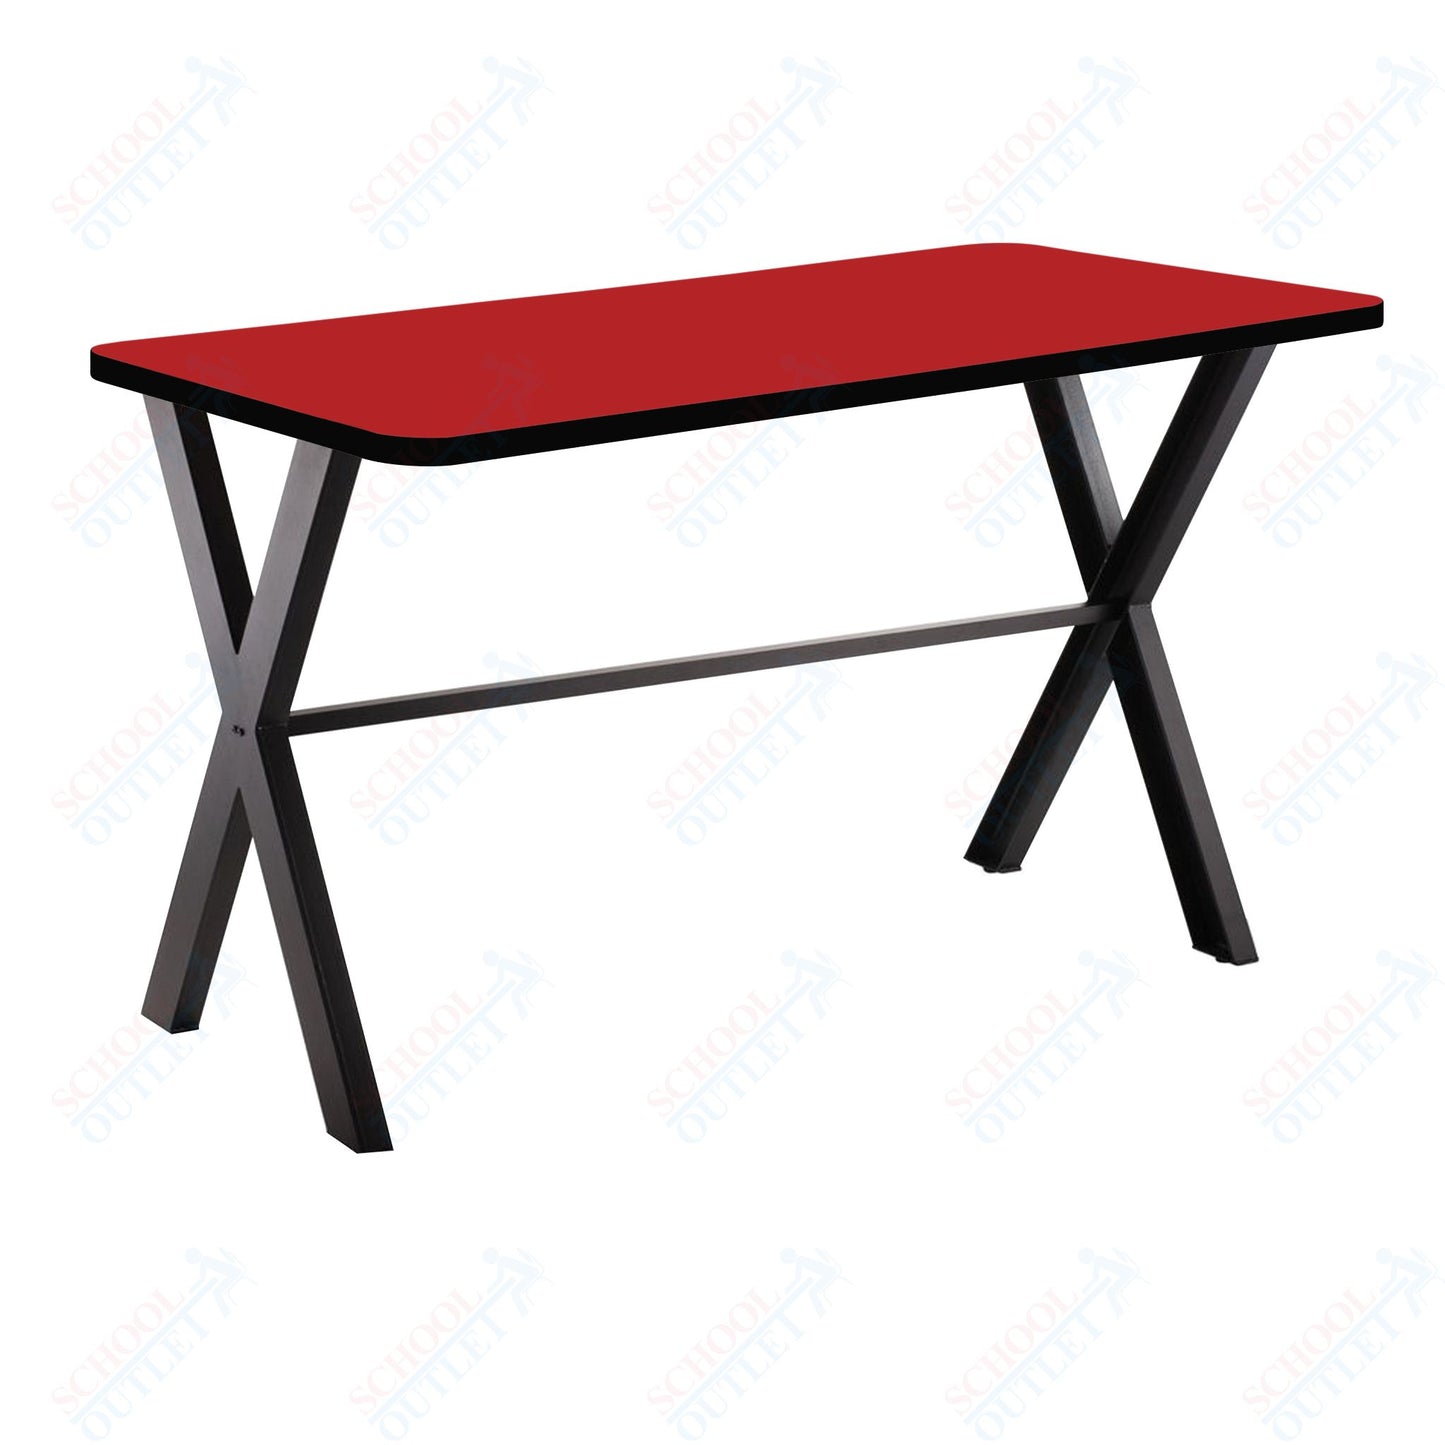 NPS CLT3060D2 - Collaborator Table, 30"x 60" Rectangle, 30" Height w/ Crossbeam, High Pressure Laminate Top (National Public Seating NPS-CLT3060D2)